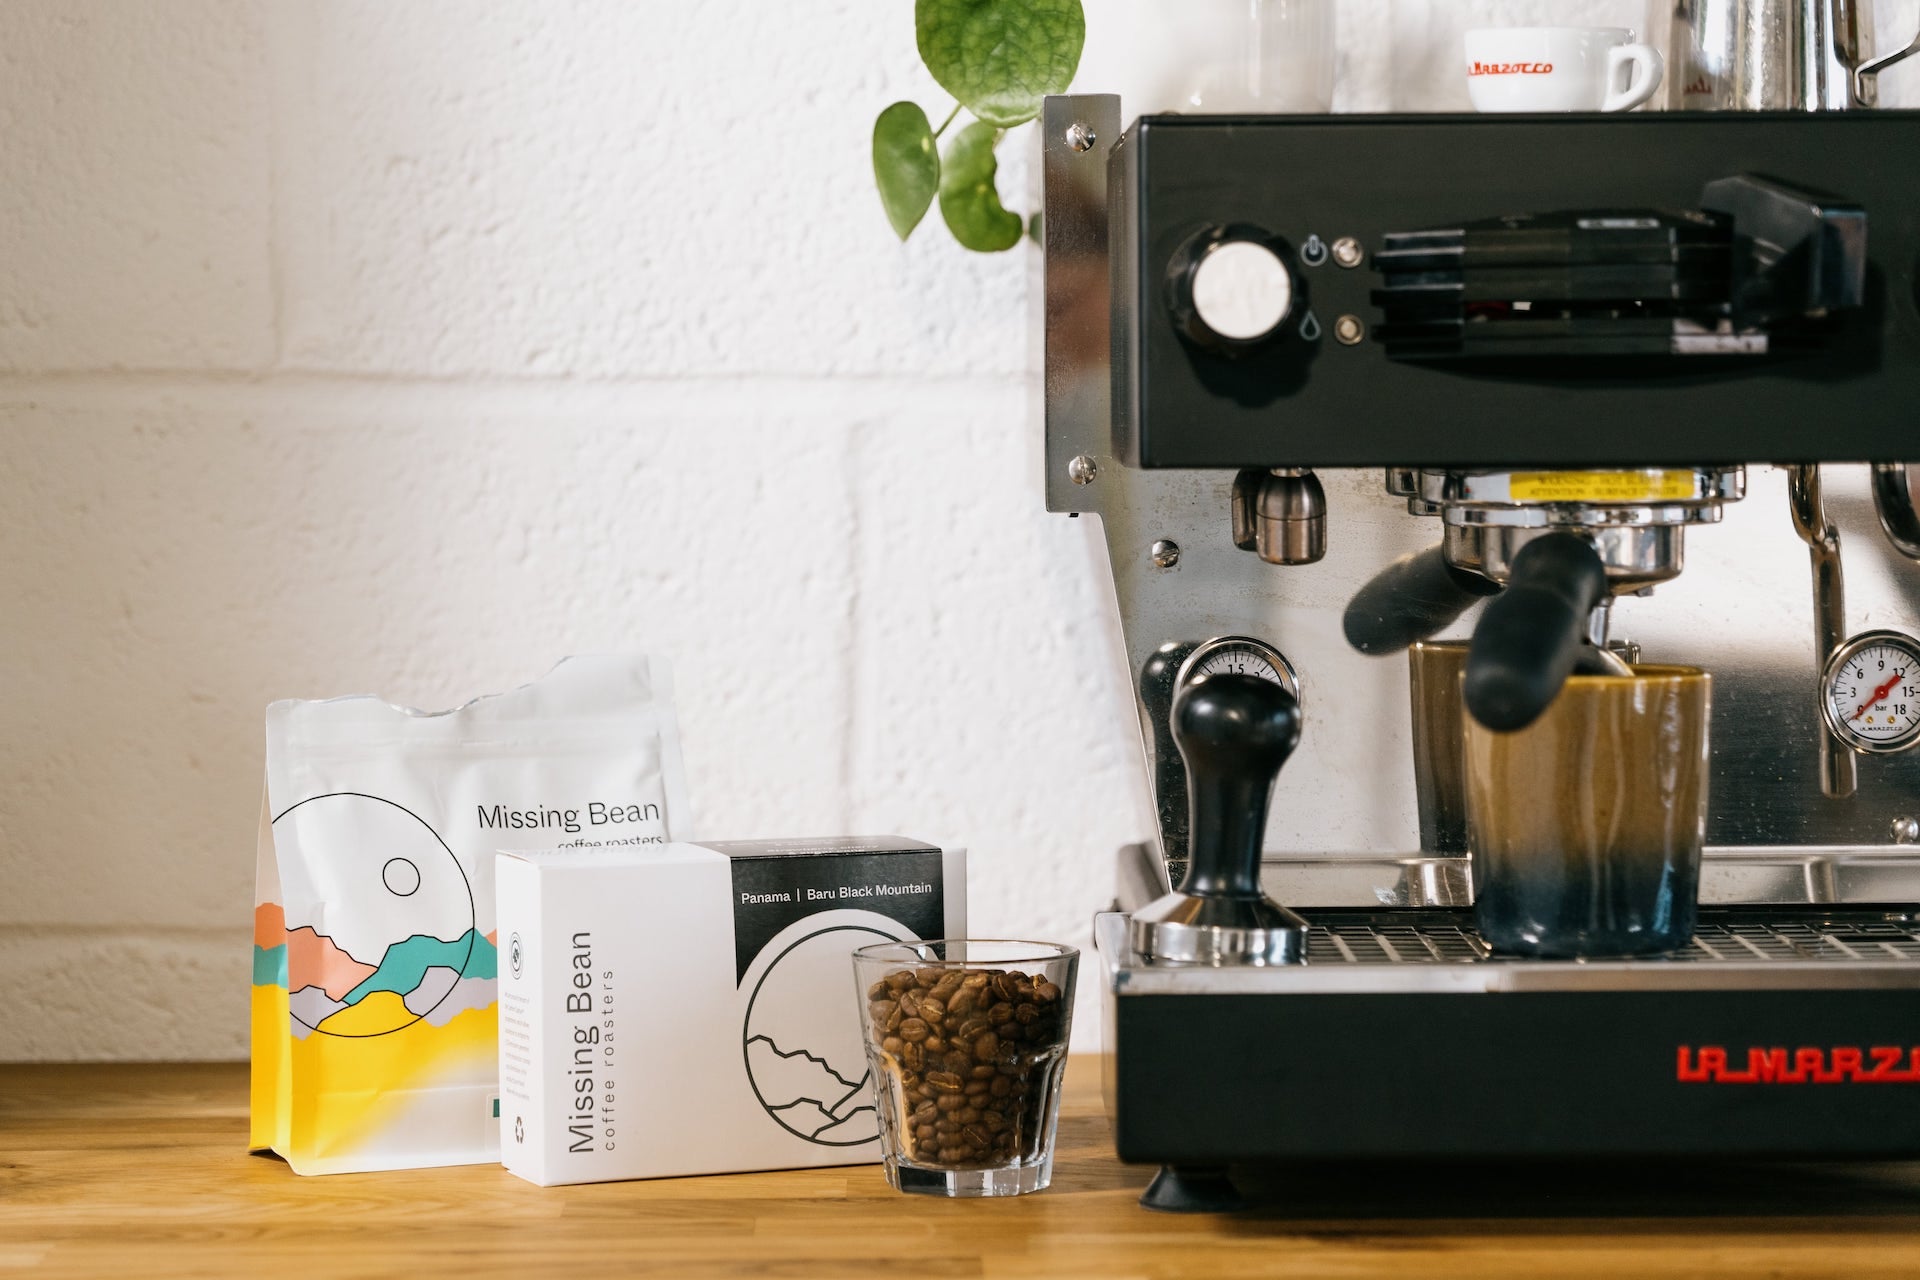 A coffee machine is placed on a wooden counter next to two Missing Bean coffee bean bags and a glass filled with coffee beans. A plant hangs on the wall in the background.